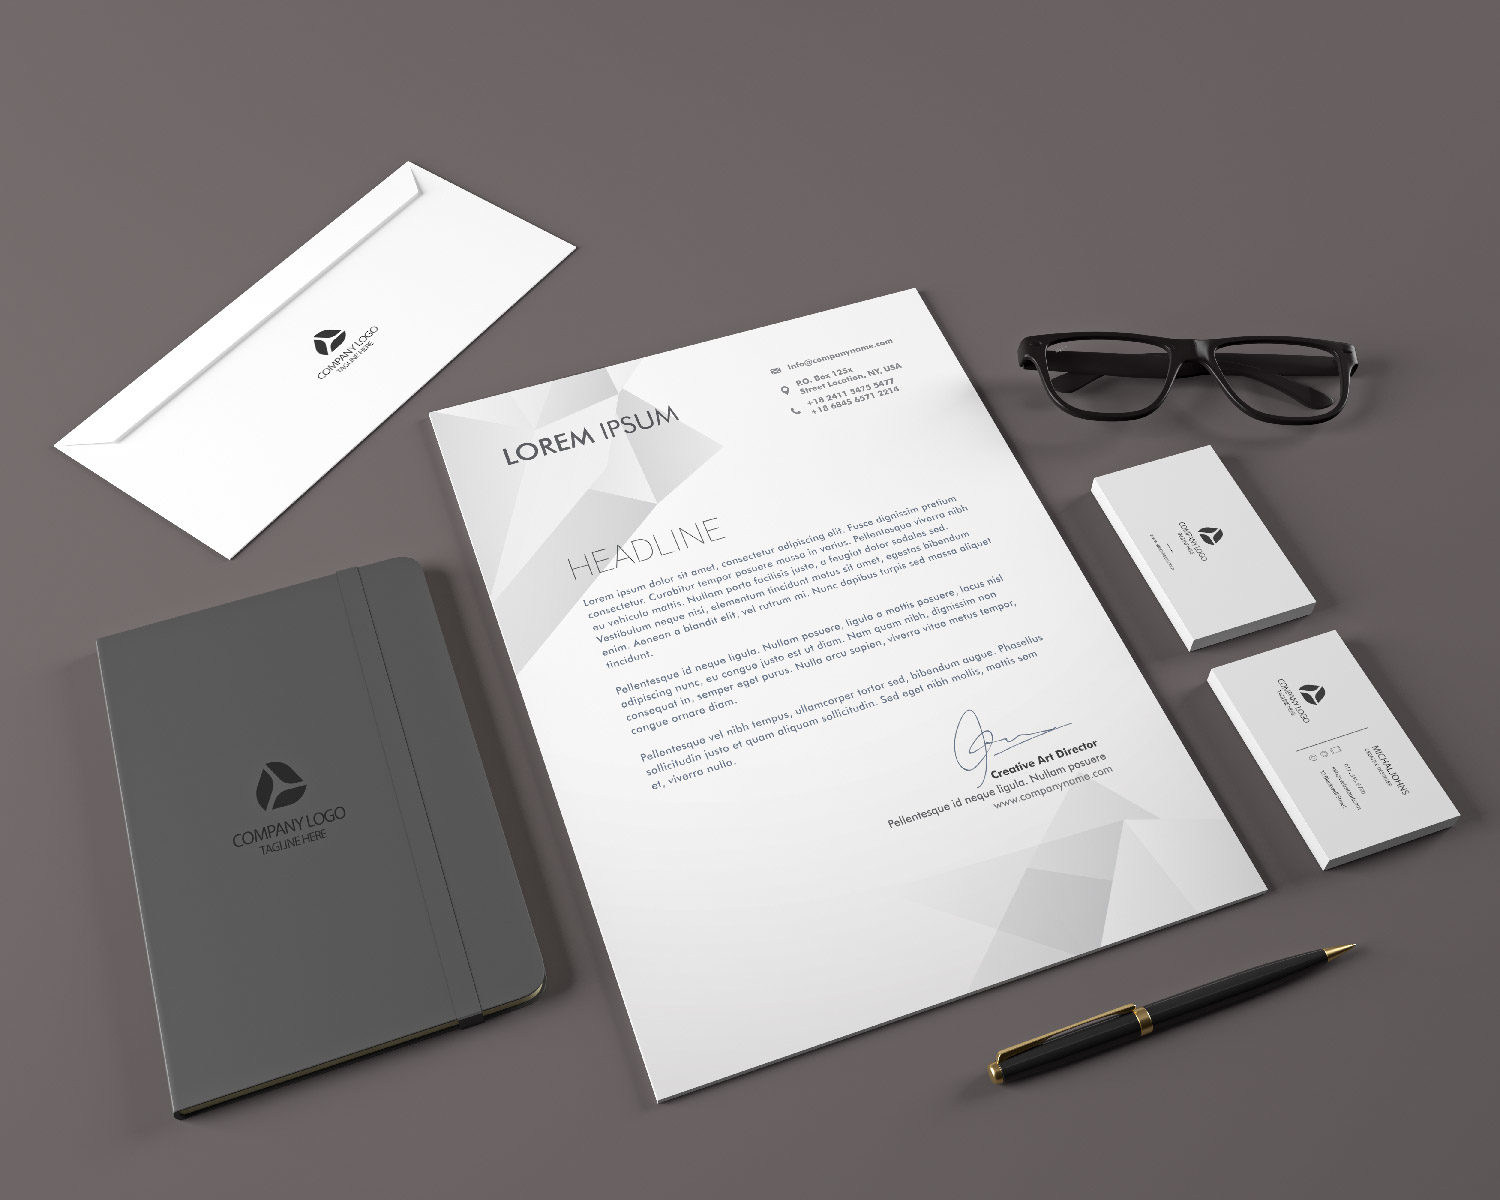 Download Letterhead Mockup Free : Download This Free Letterhead ...